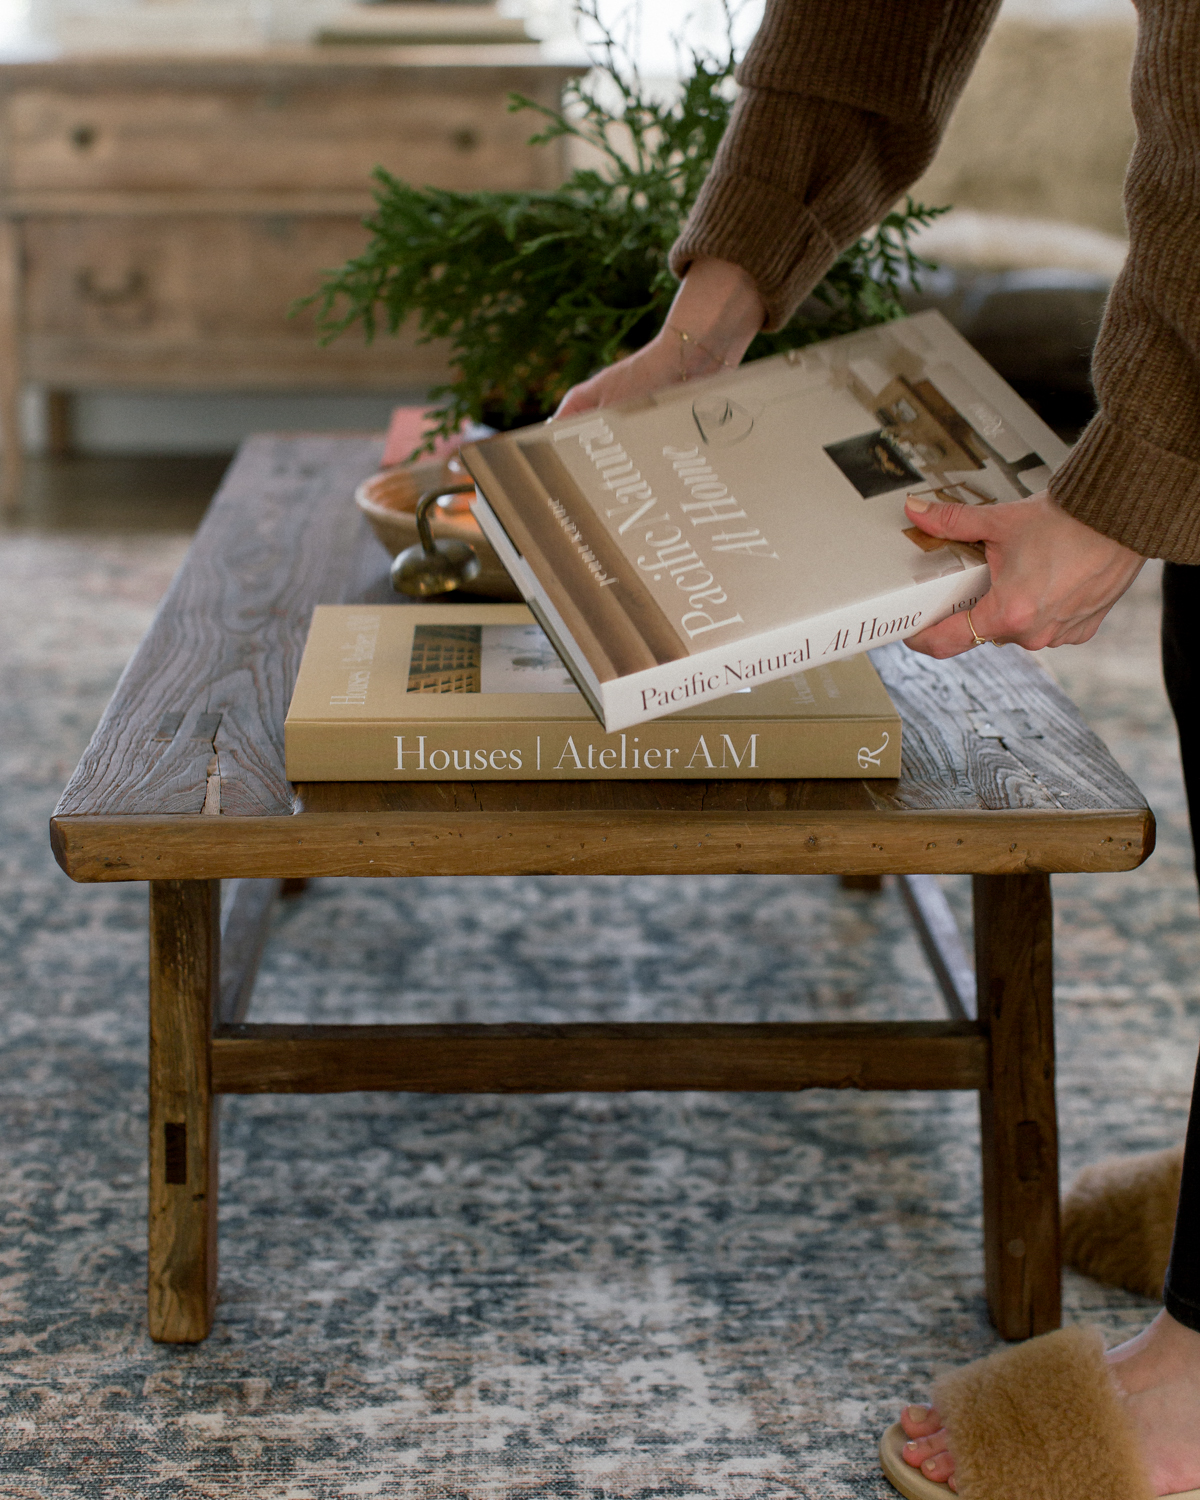 Coffee table books: Where & how we use them